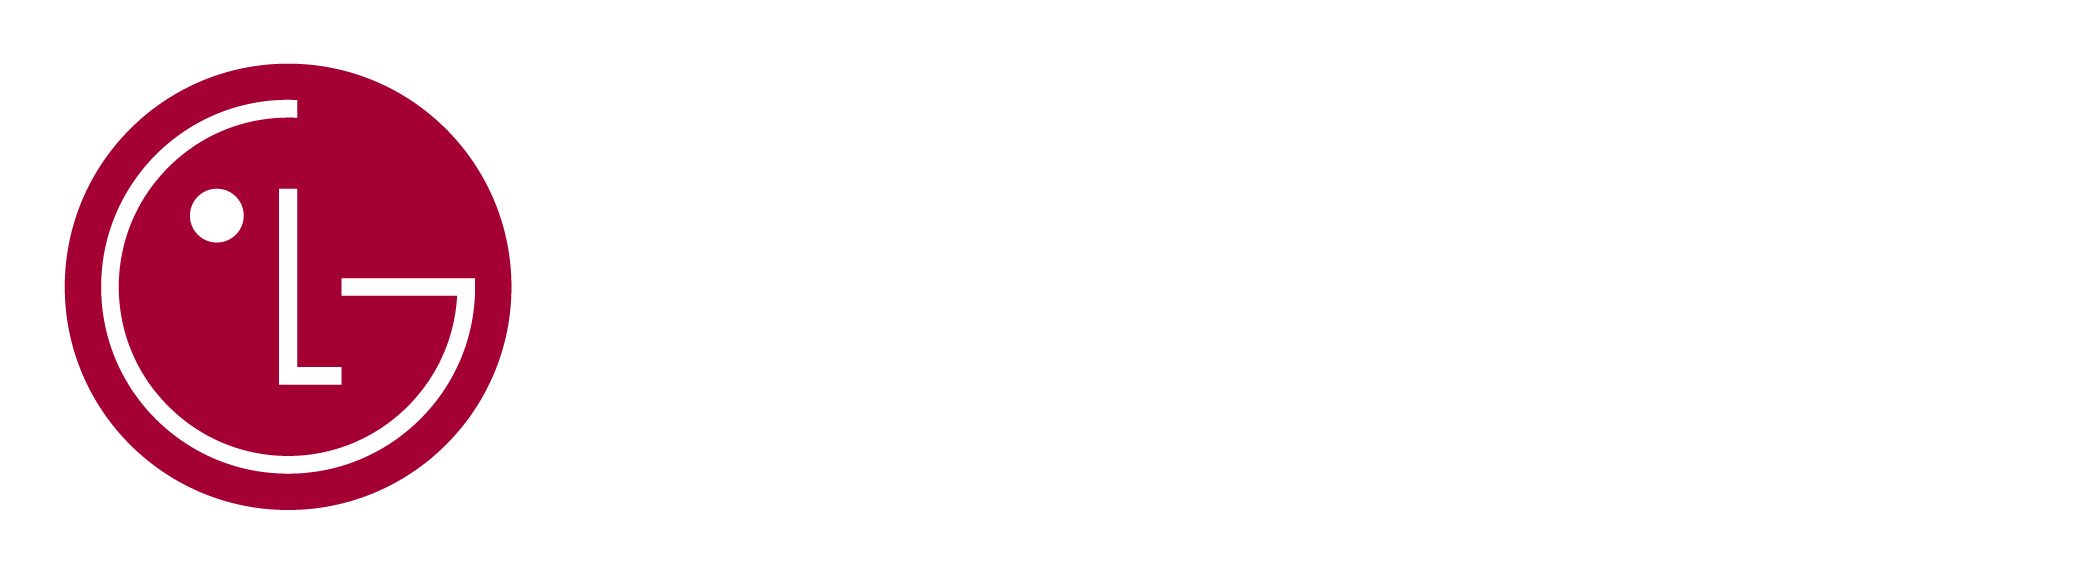 LG Business solutions